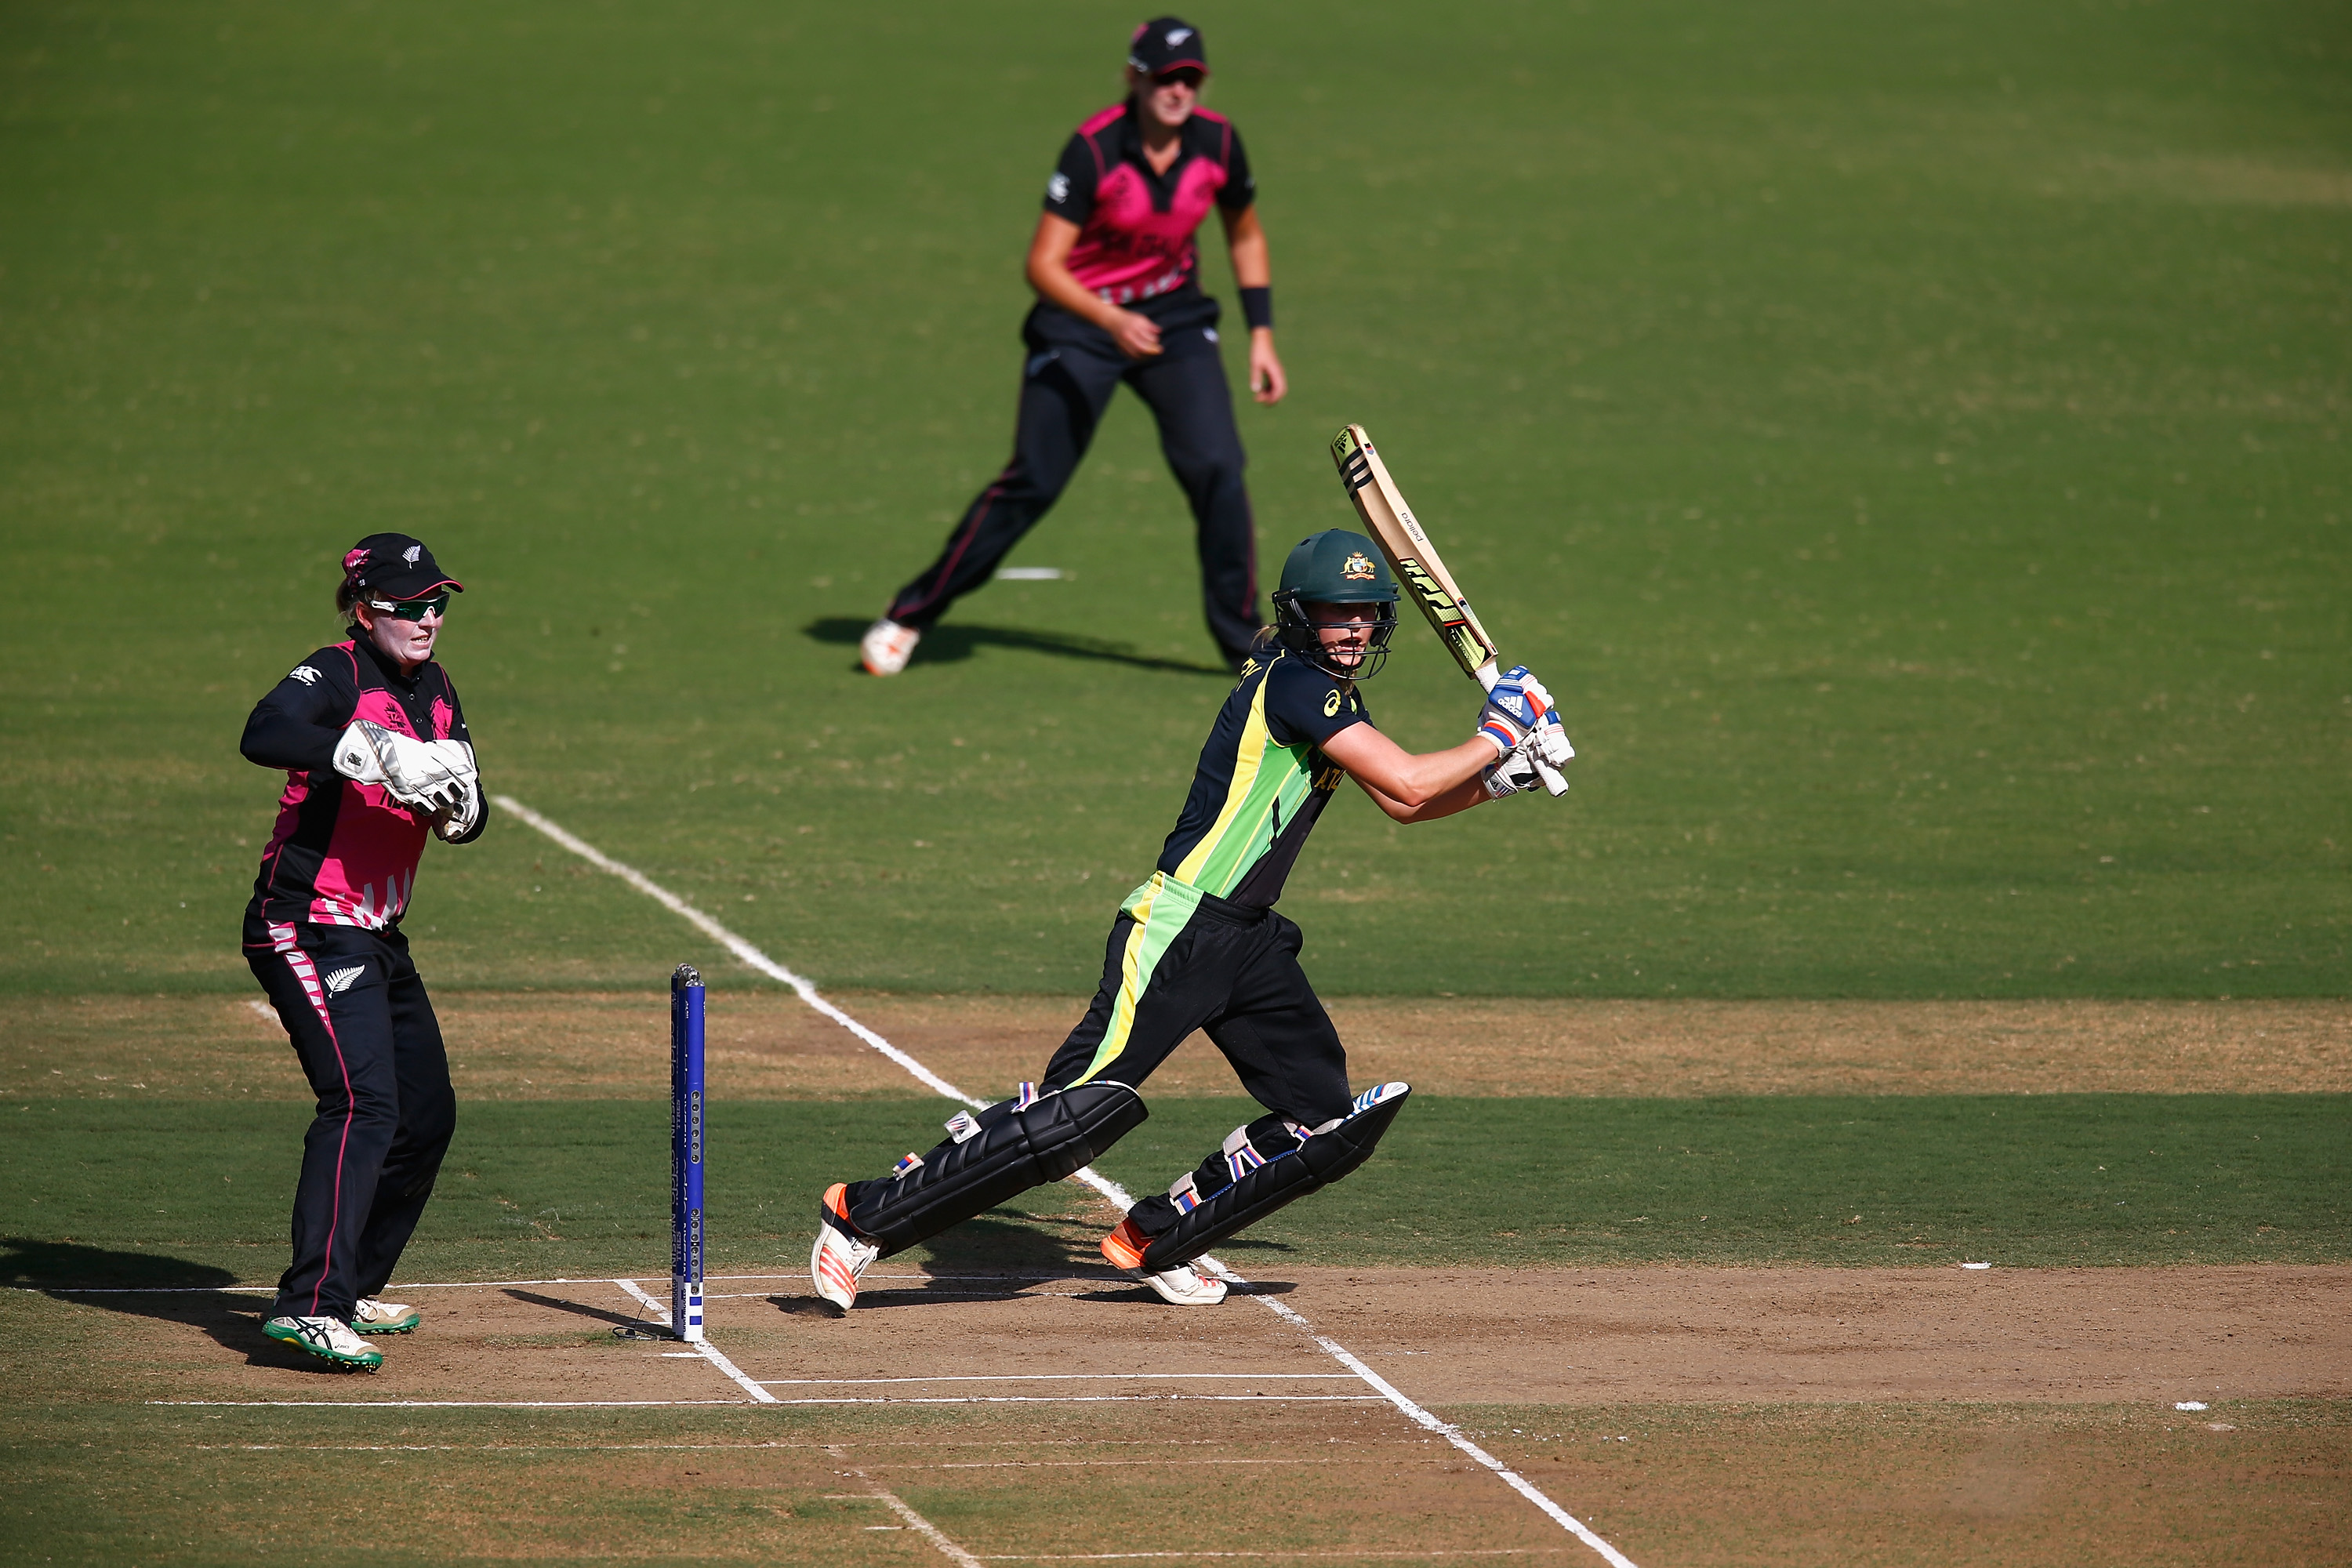 "NAGPUR, INDIA - MARCH 21: Ellyse Perry of Australia in action with Rachel Priest of New Zealand during the Women's ICC World Twenty20 India 2016 Group A match between Australia and New Zealand at the Vidarbha Cricket Association Stadium on March 21, 2016 in Nagpur, India. (Photo by Christopher Lee-IDI/IDI via Getty Images)"